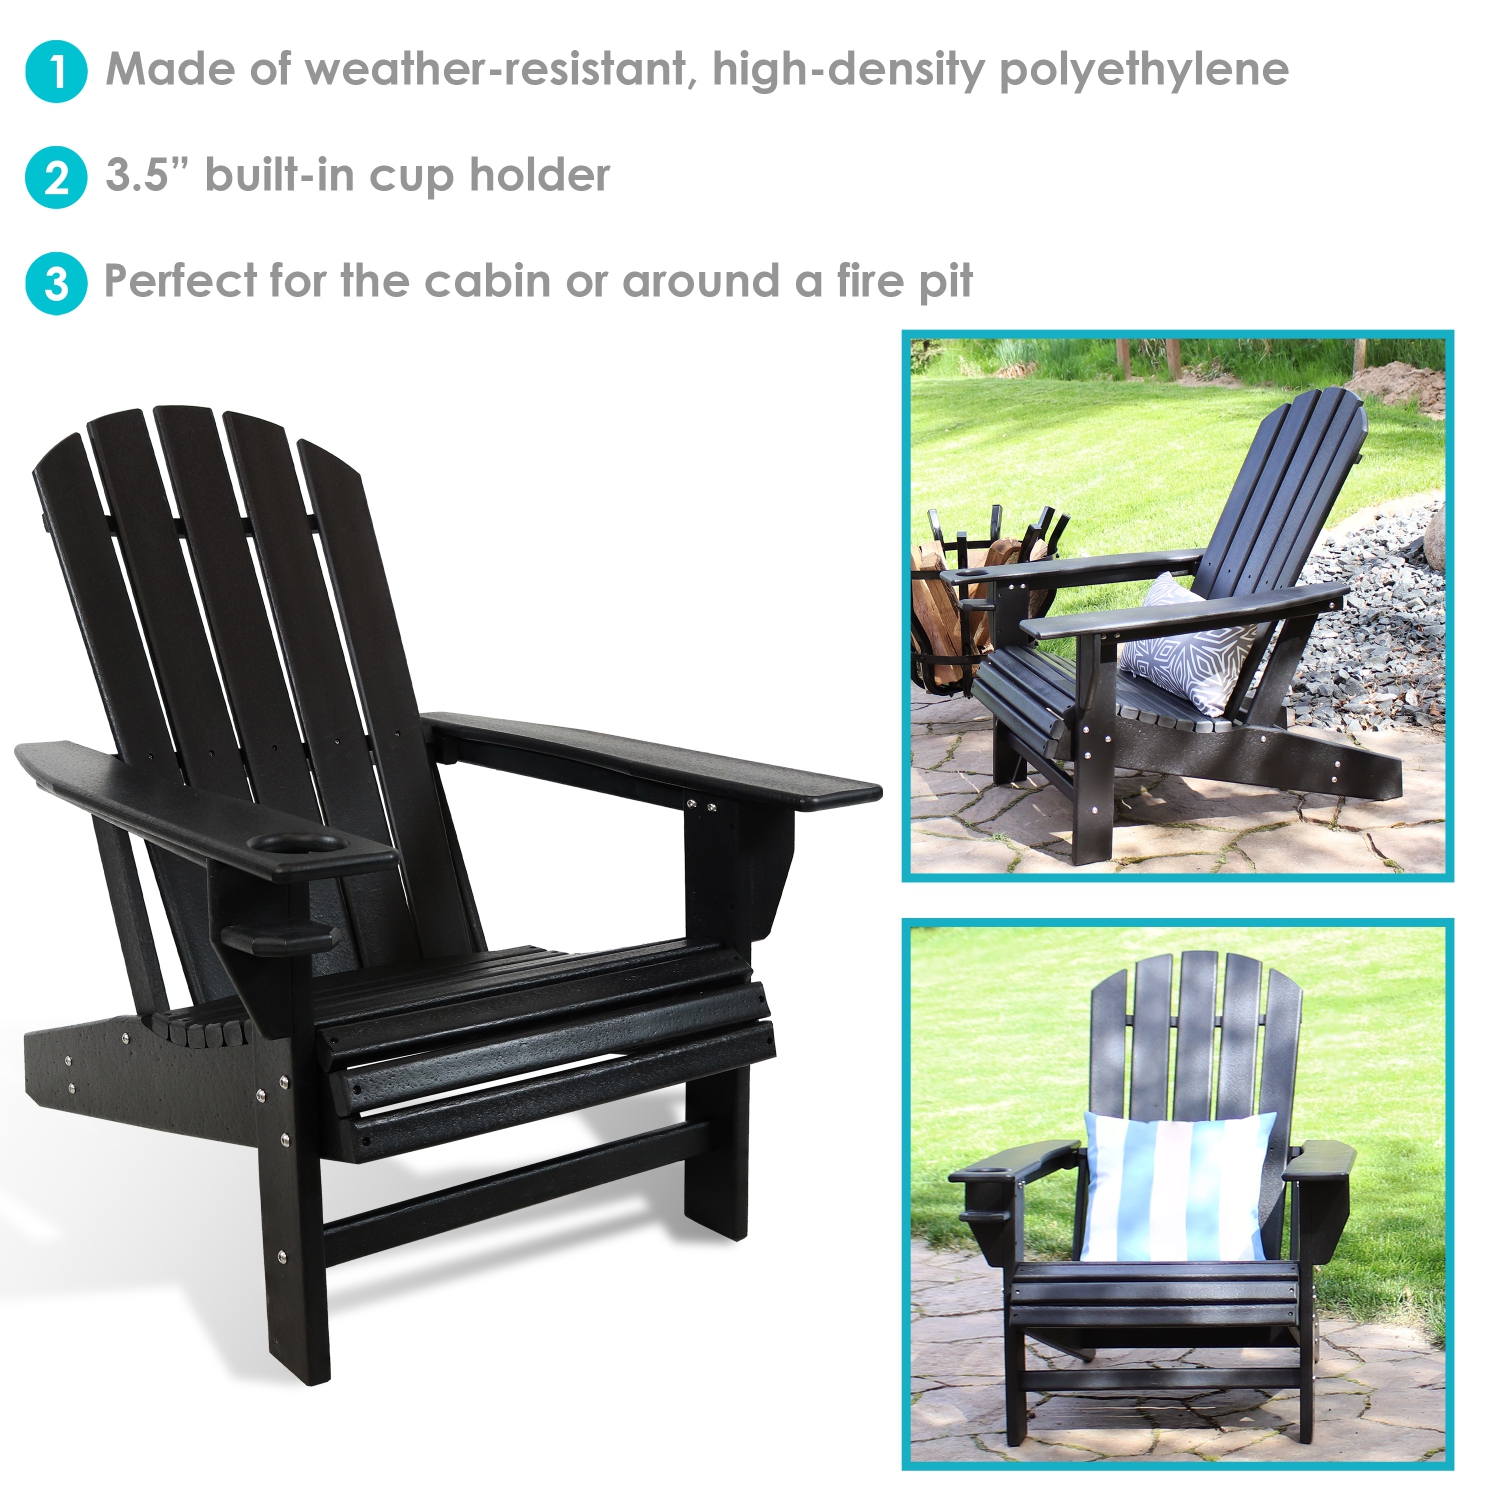 Sunnydaze Lake Style Adirondack Chair with Cup Holder - Black